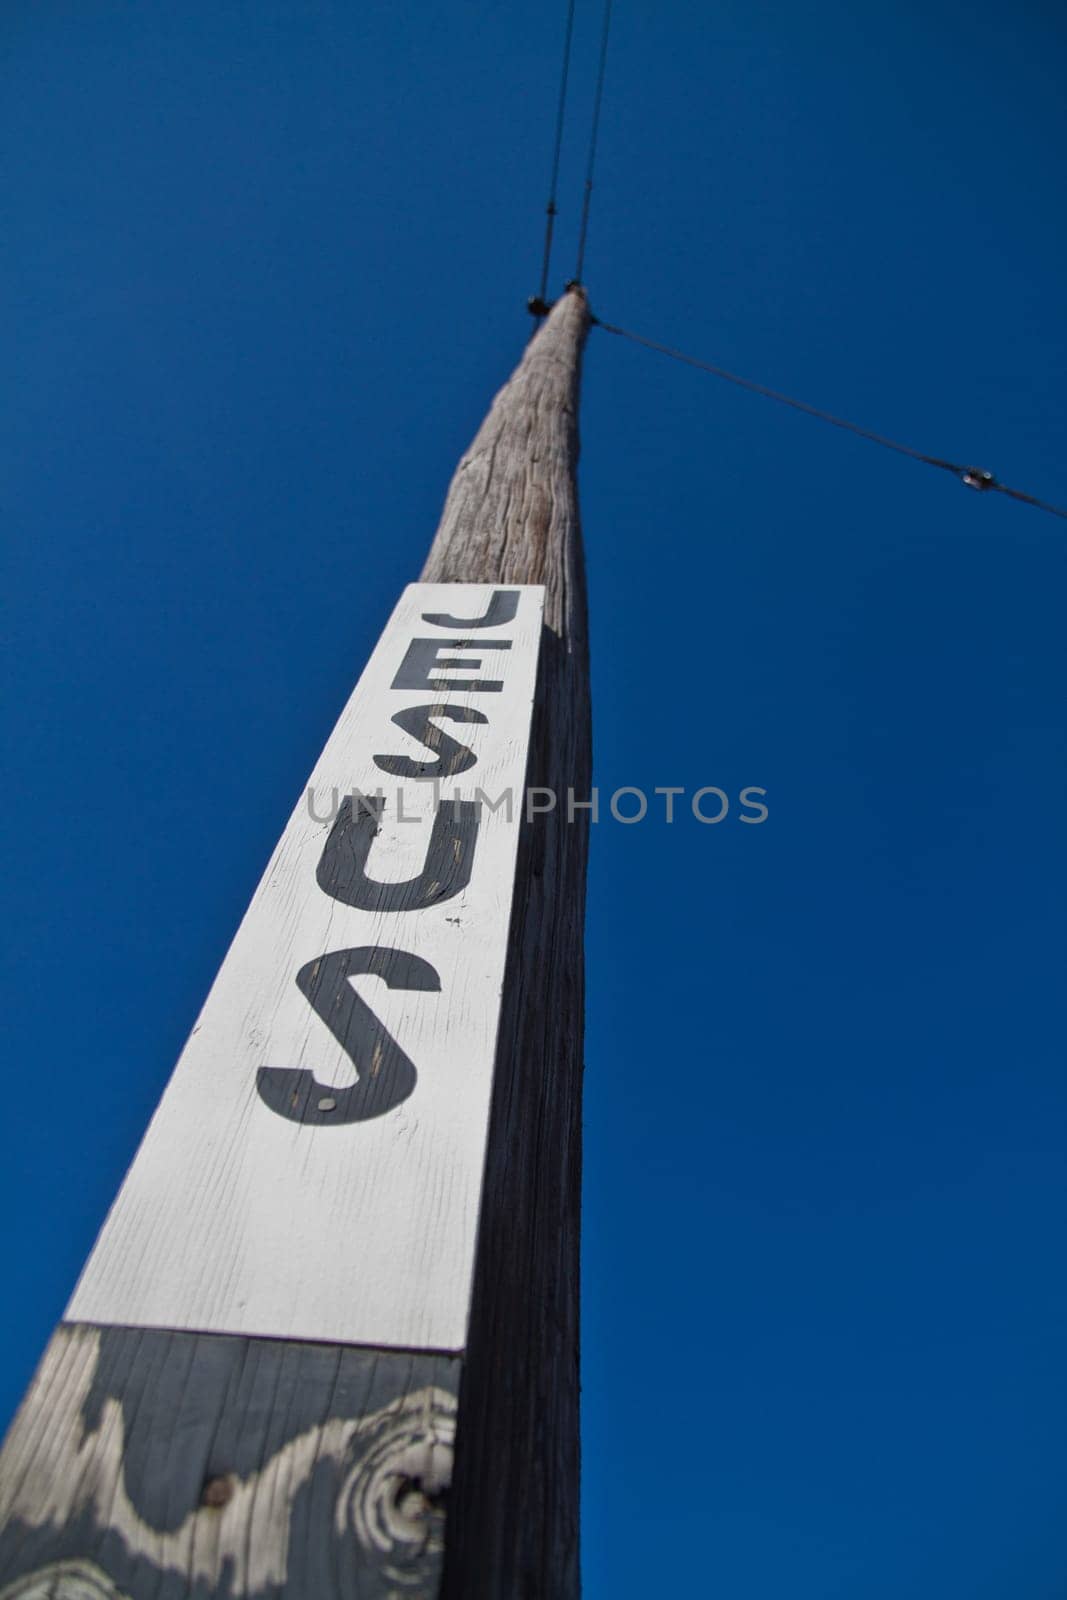 Rising Faith: A striking wooden utility pole against a clear blue sky features bold 'JESUS' lettering, evoking spirituality and reflection. Perfect for religious, inspirational, or communication-themed projects.